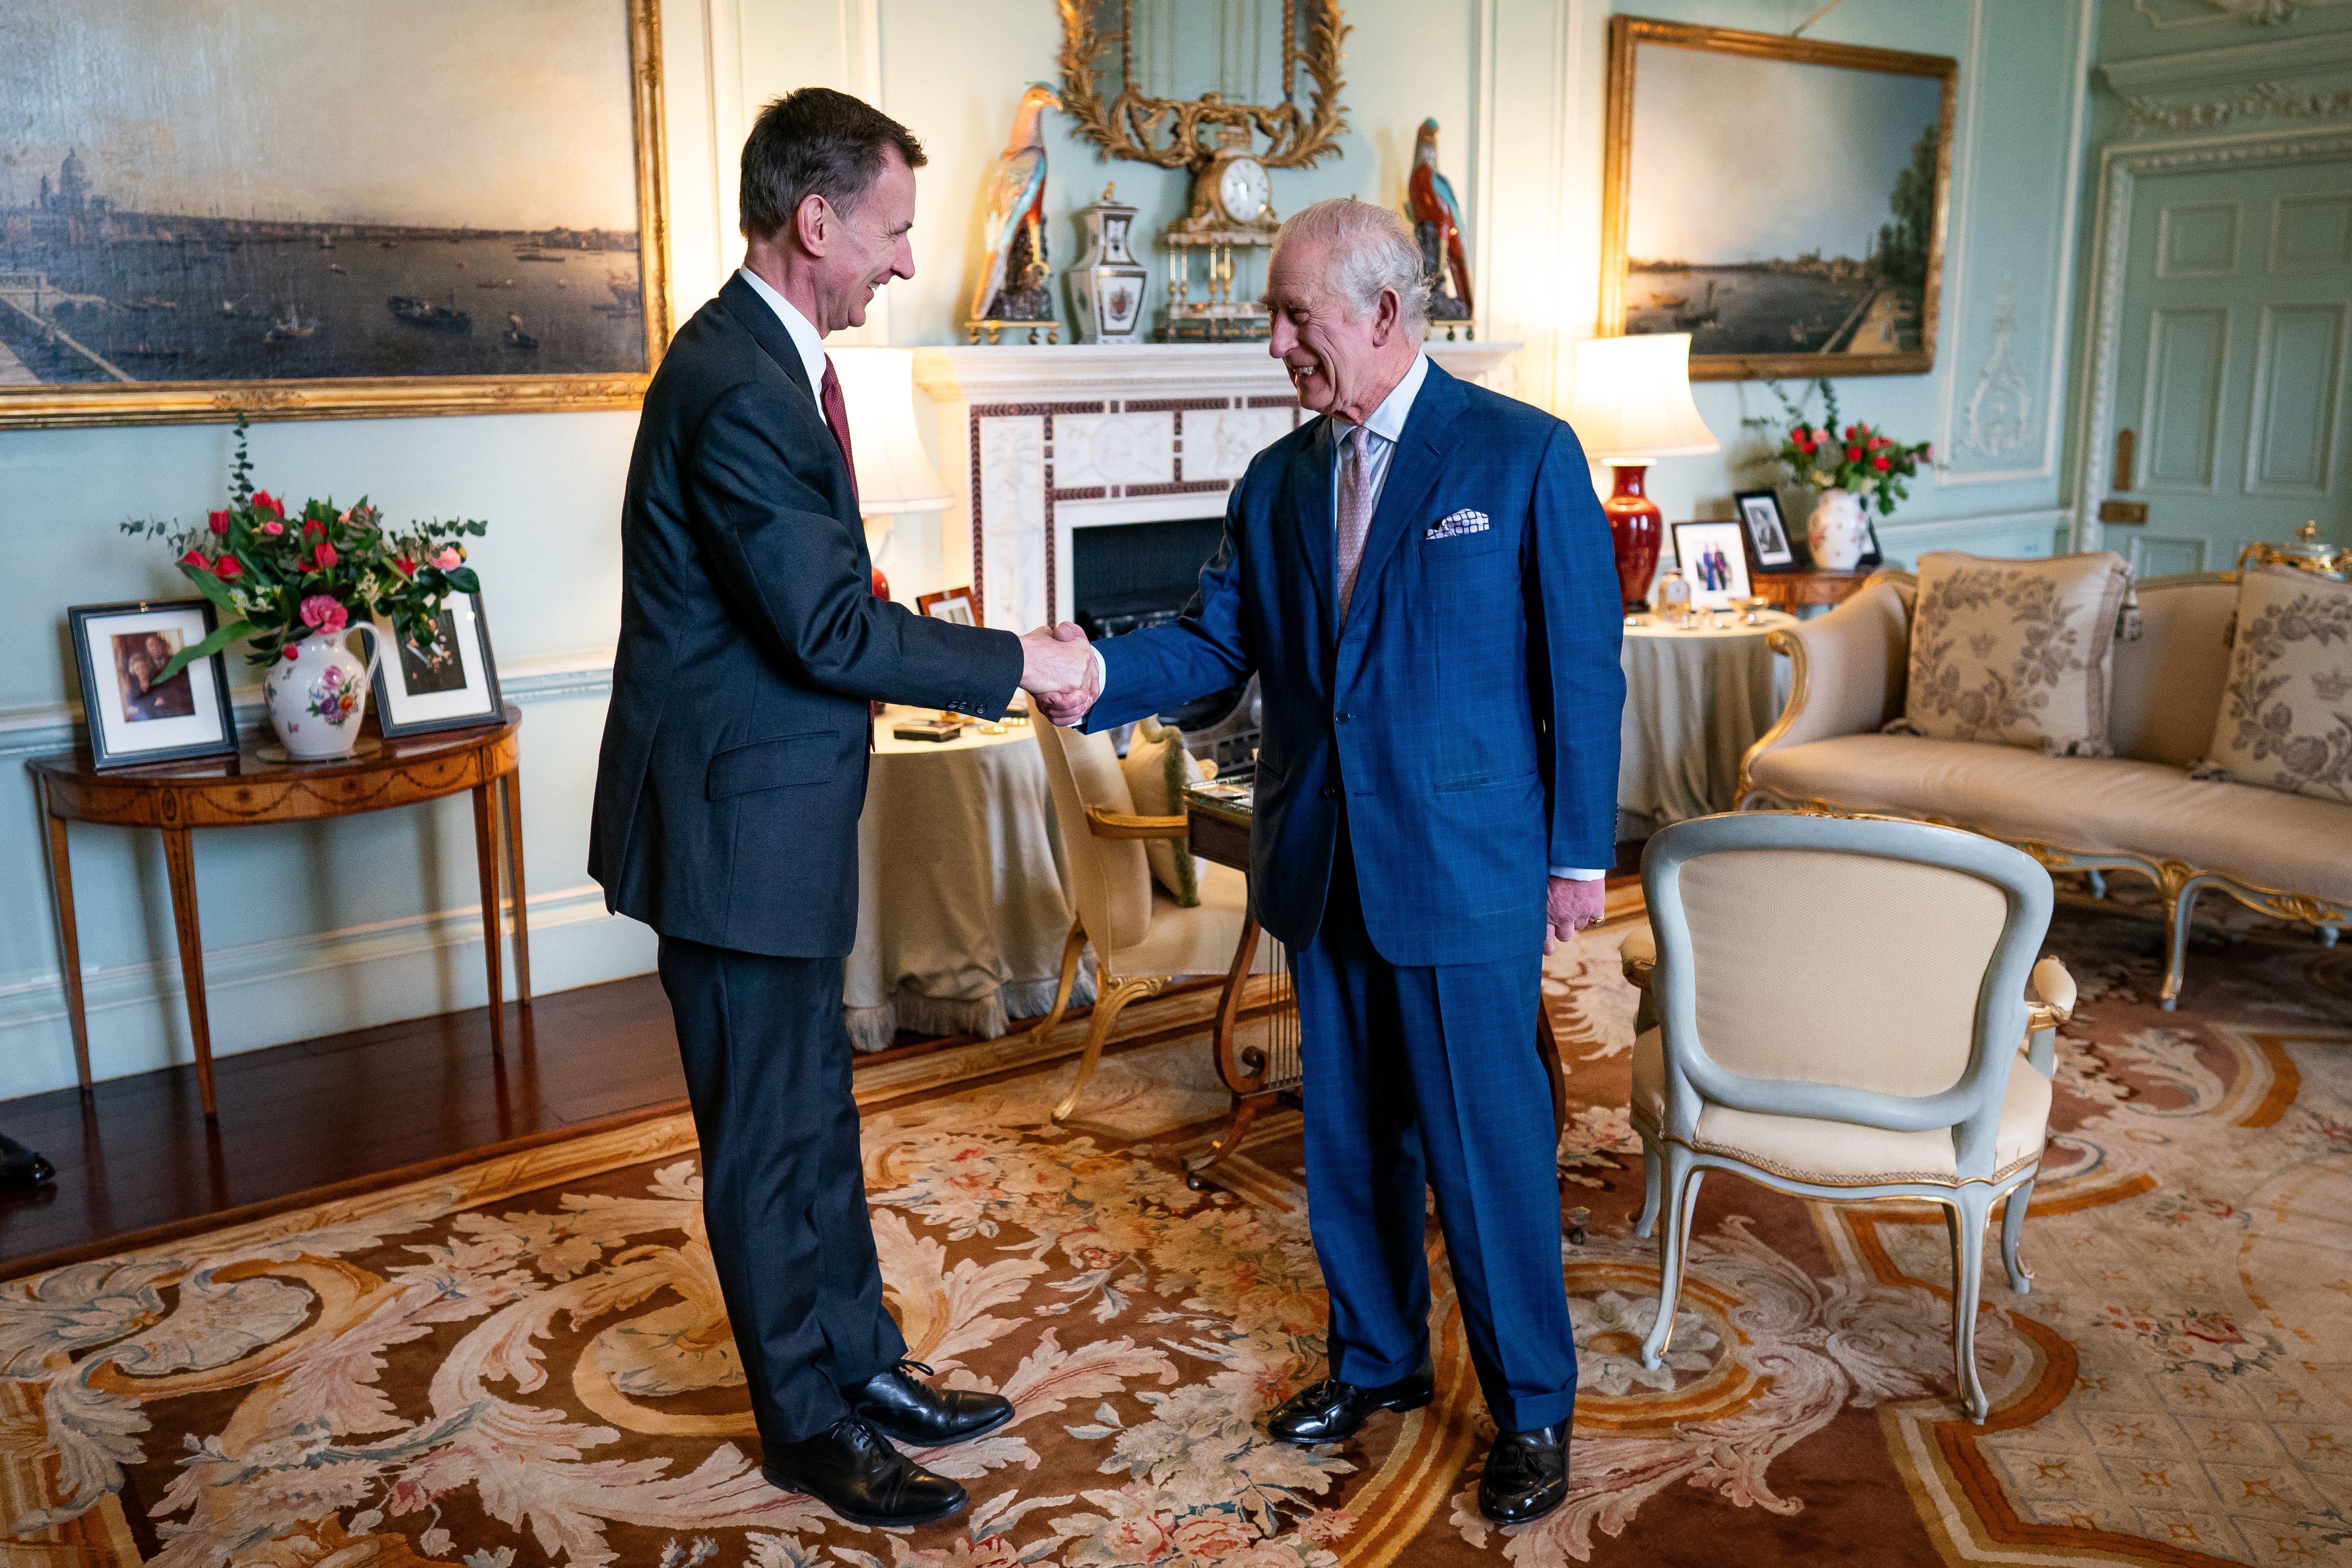 The King meets his chancellor ahead of this week’s Budget